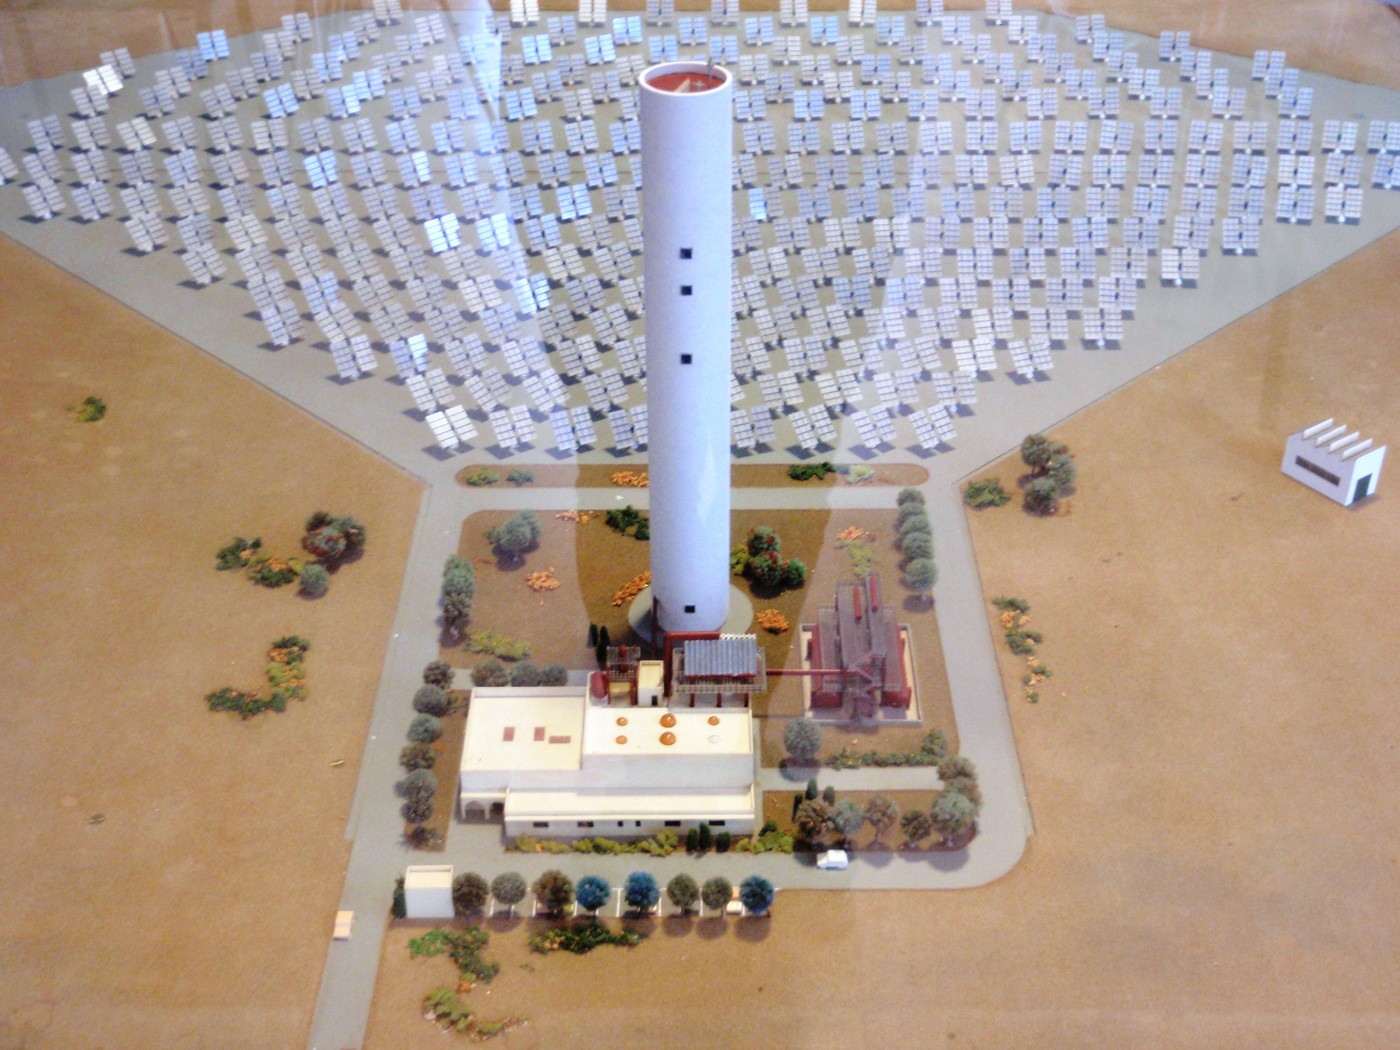 Model of Central Power Receiving System